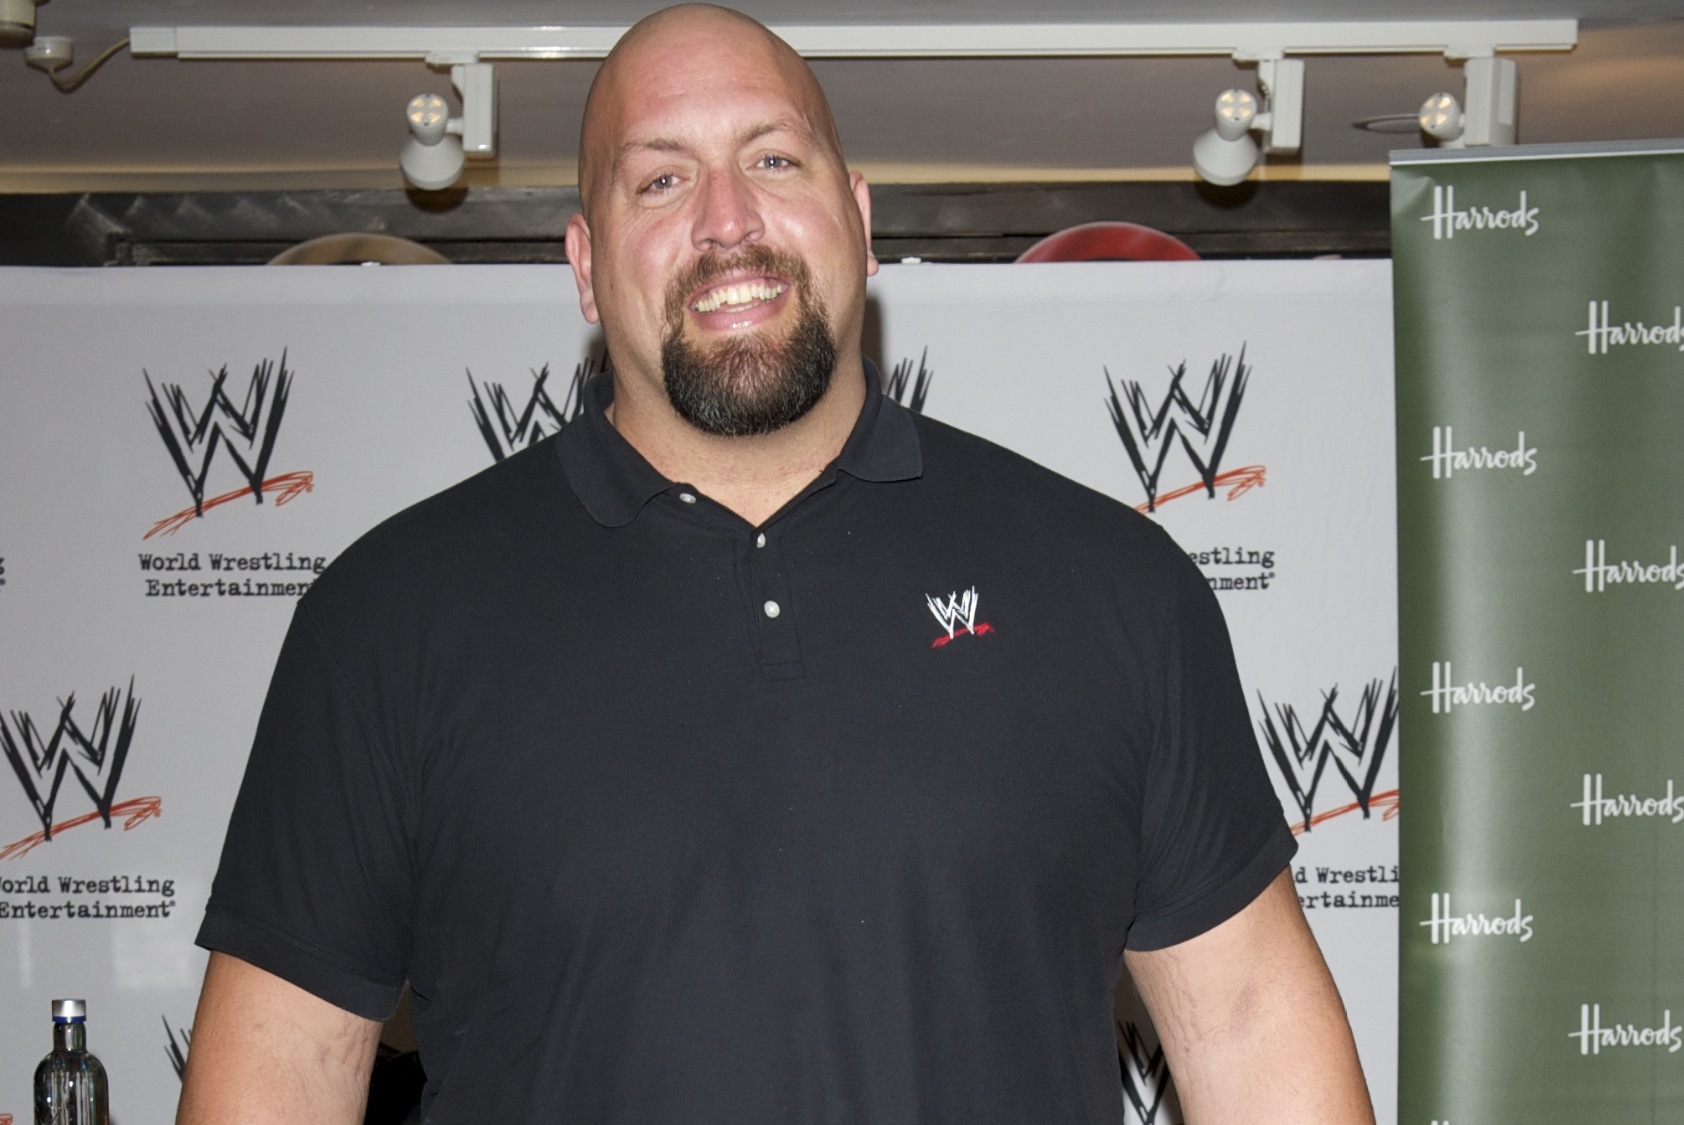 Big Show's biggest knockouts: WWE Top 10, Jan. 12, 2020 